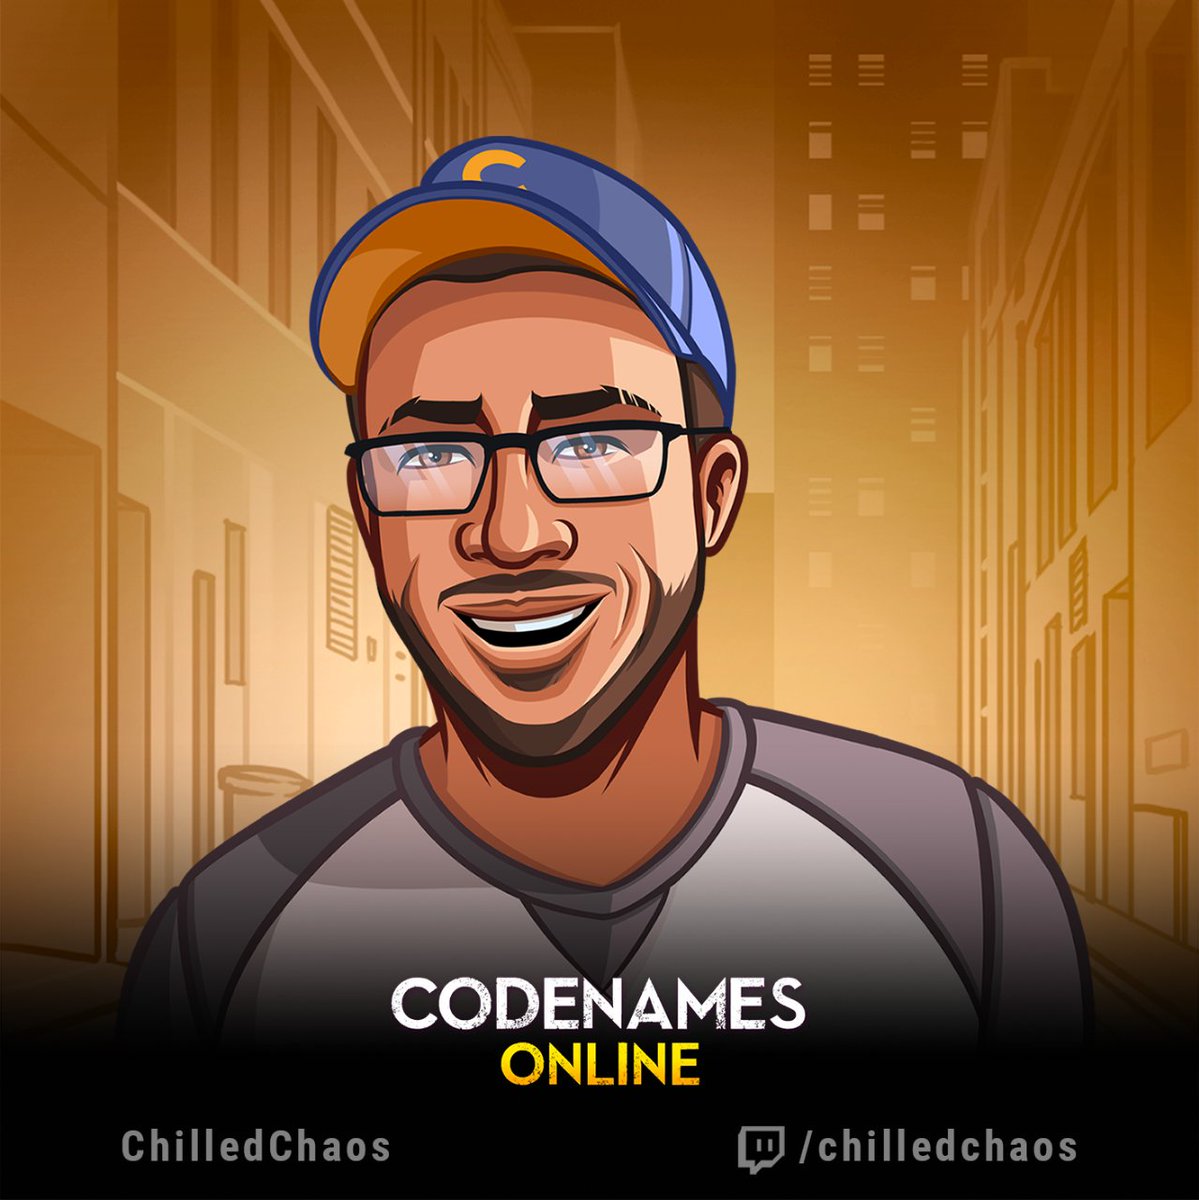 #CNcelebration

Do you like to come up with custom words for #Codenames? You’ll love @ChilledChaos streams! Chilled has been playing Codenames since 2020 and is known for including audience-made words.

📺 twitch.tv/chilledchaos
⏱️ Central time